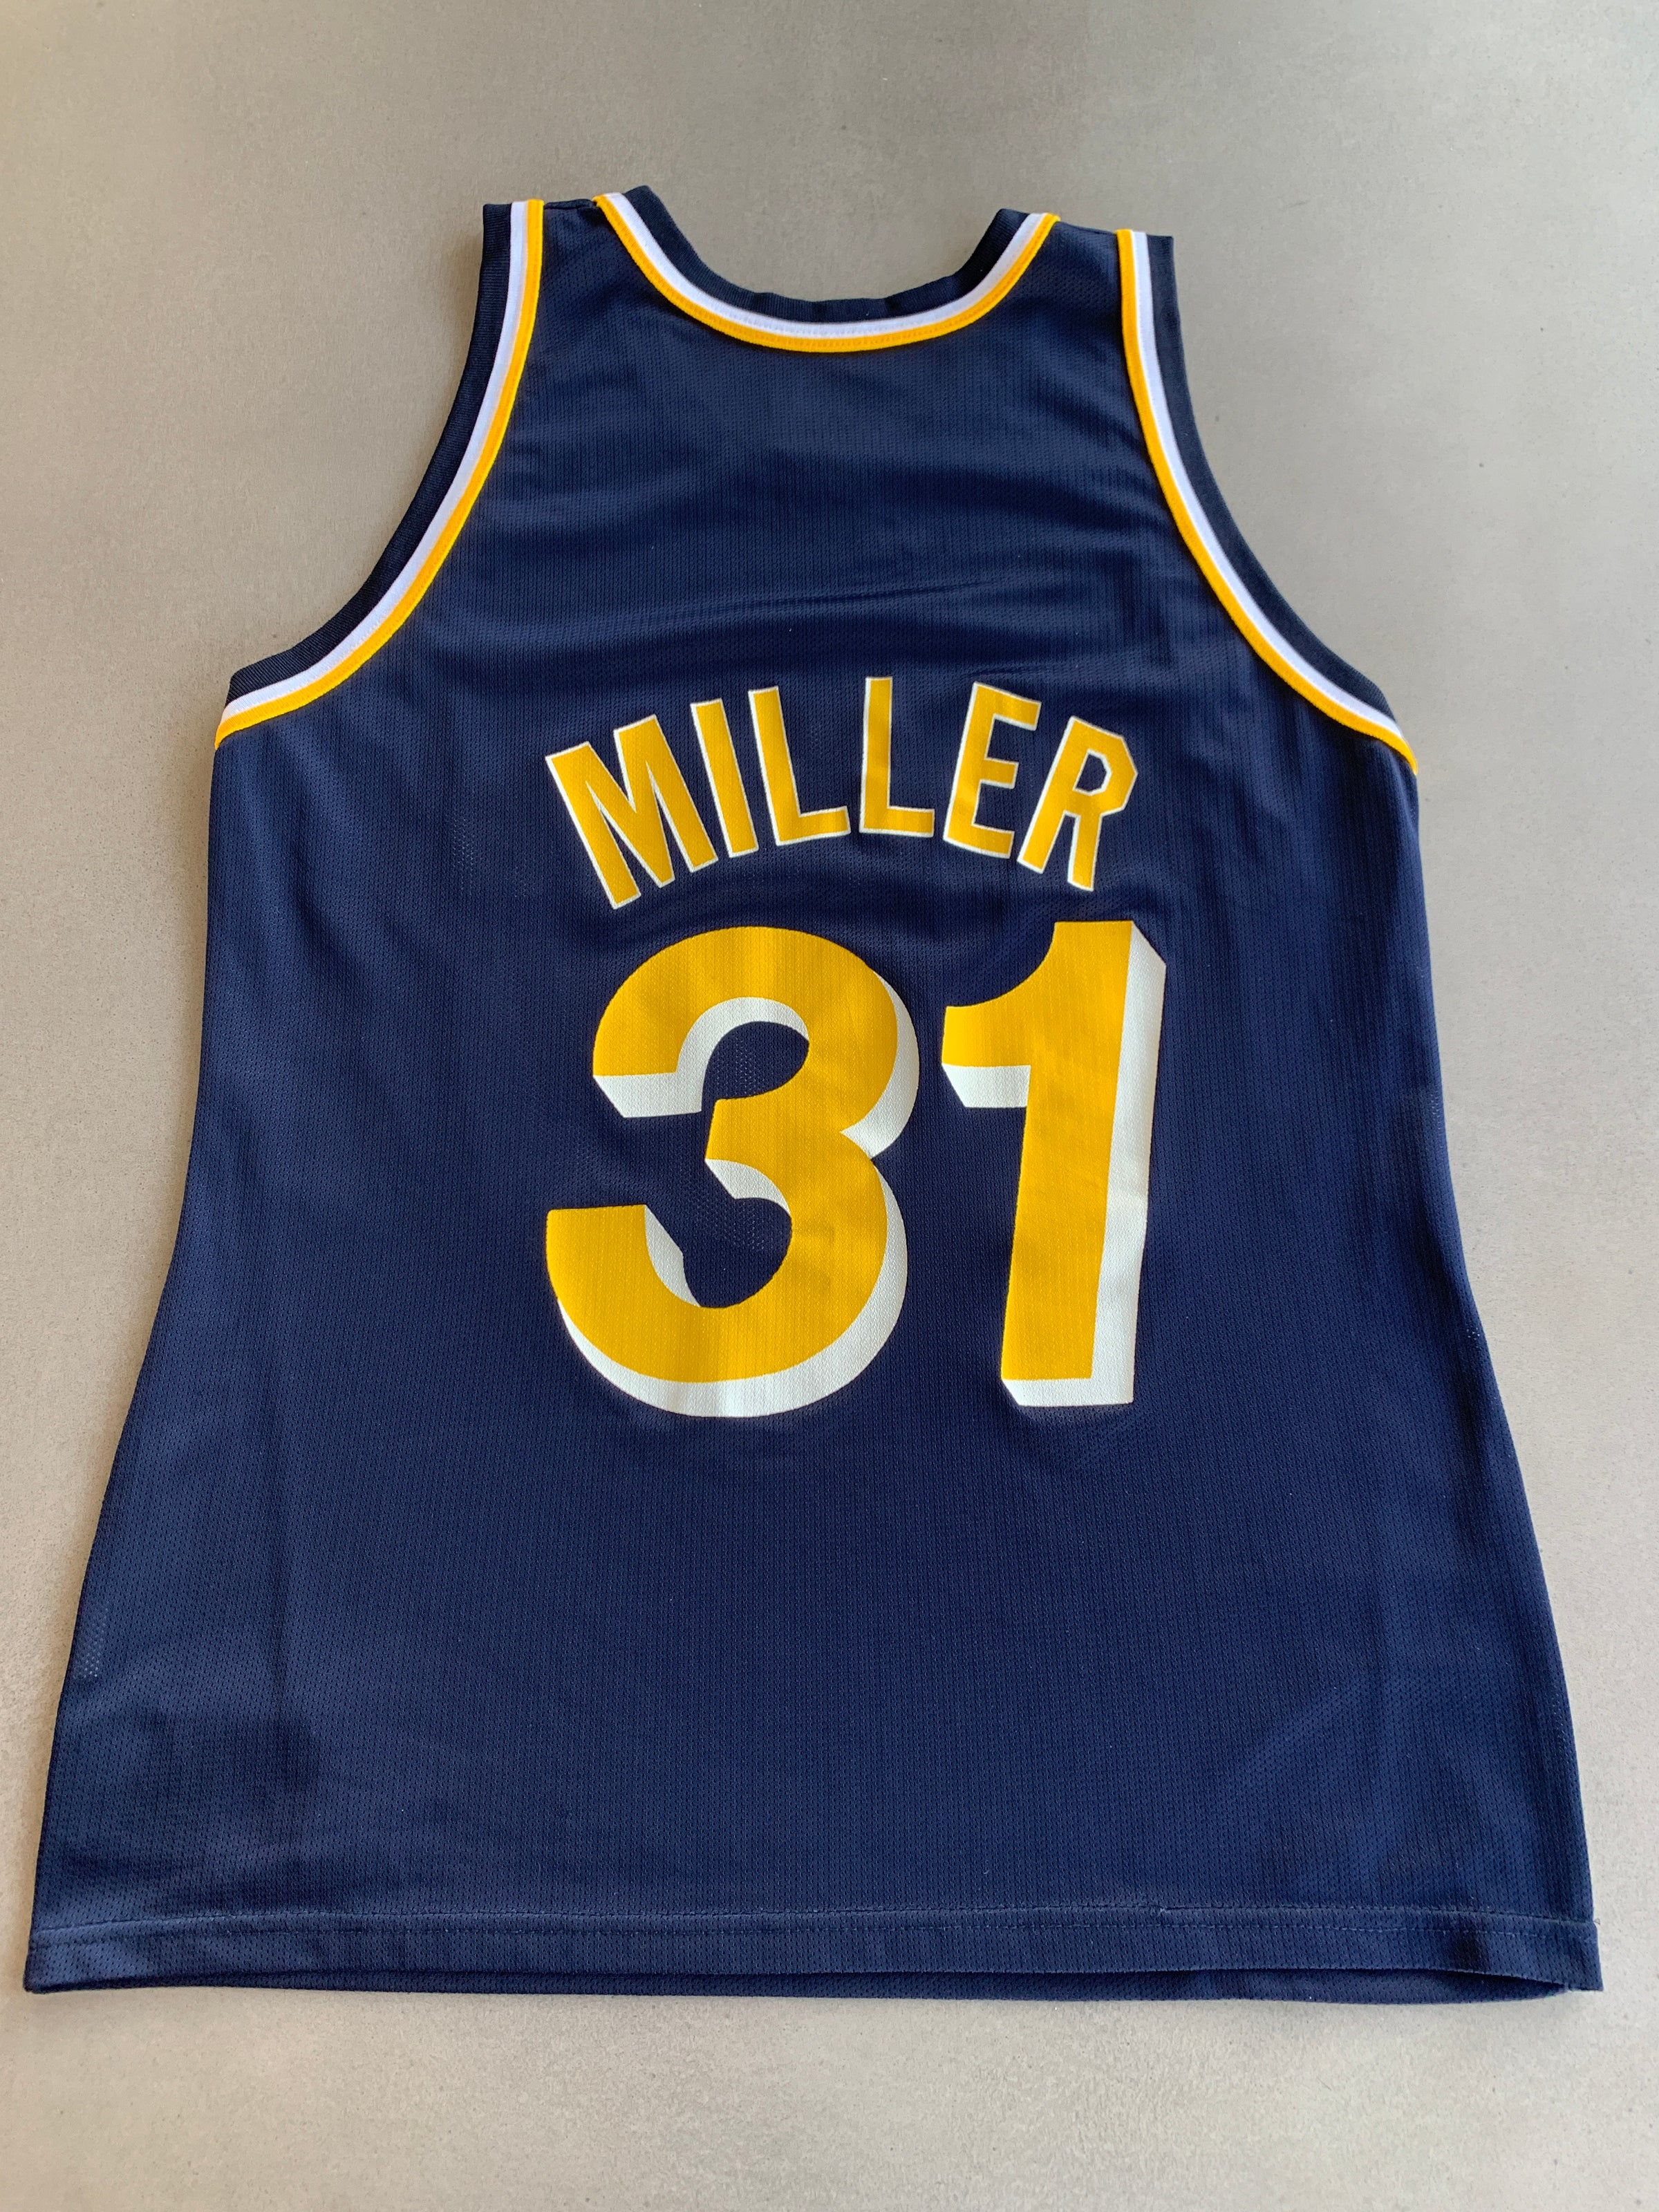 indiana pacers old school jersey